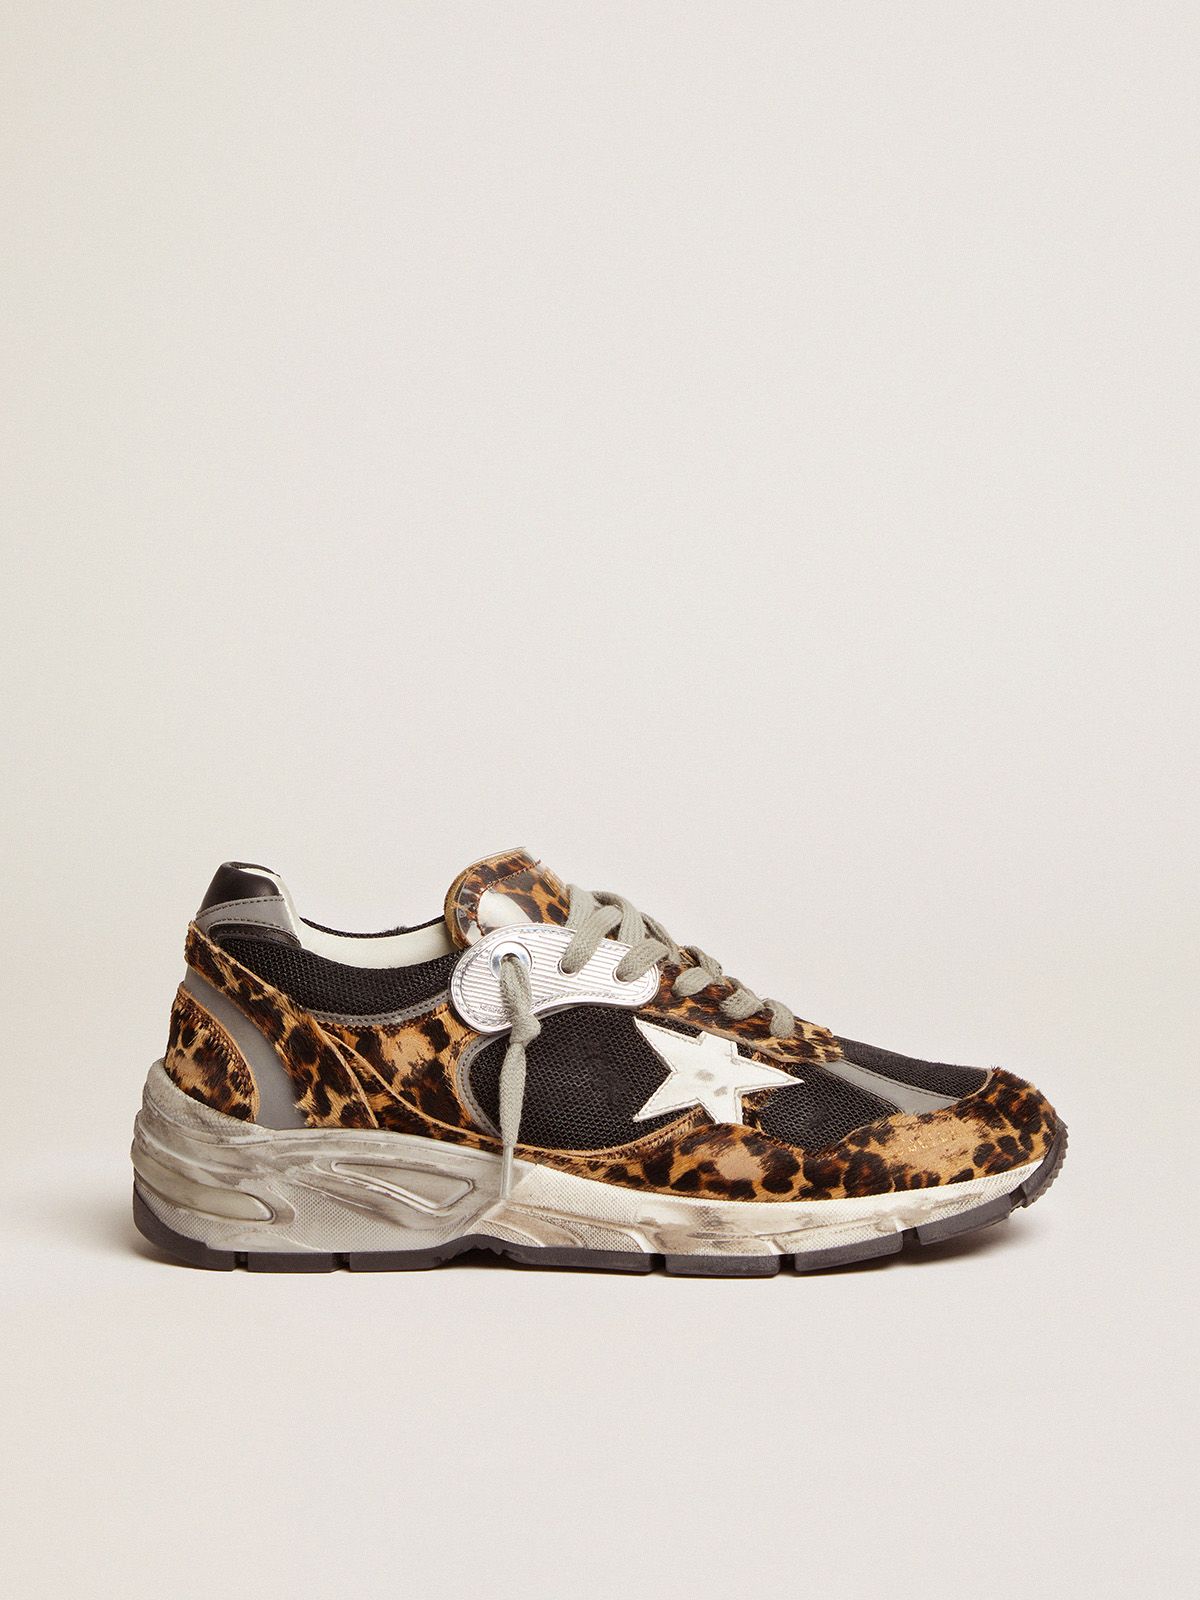 golden goose sneakers Dad-Star leopard-print skin star leather in pony white with